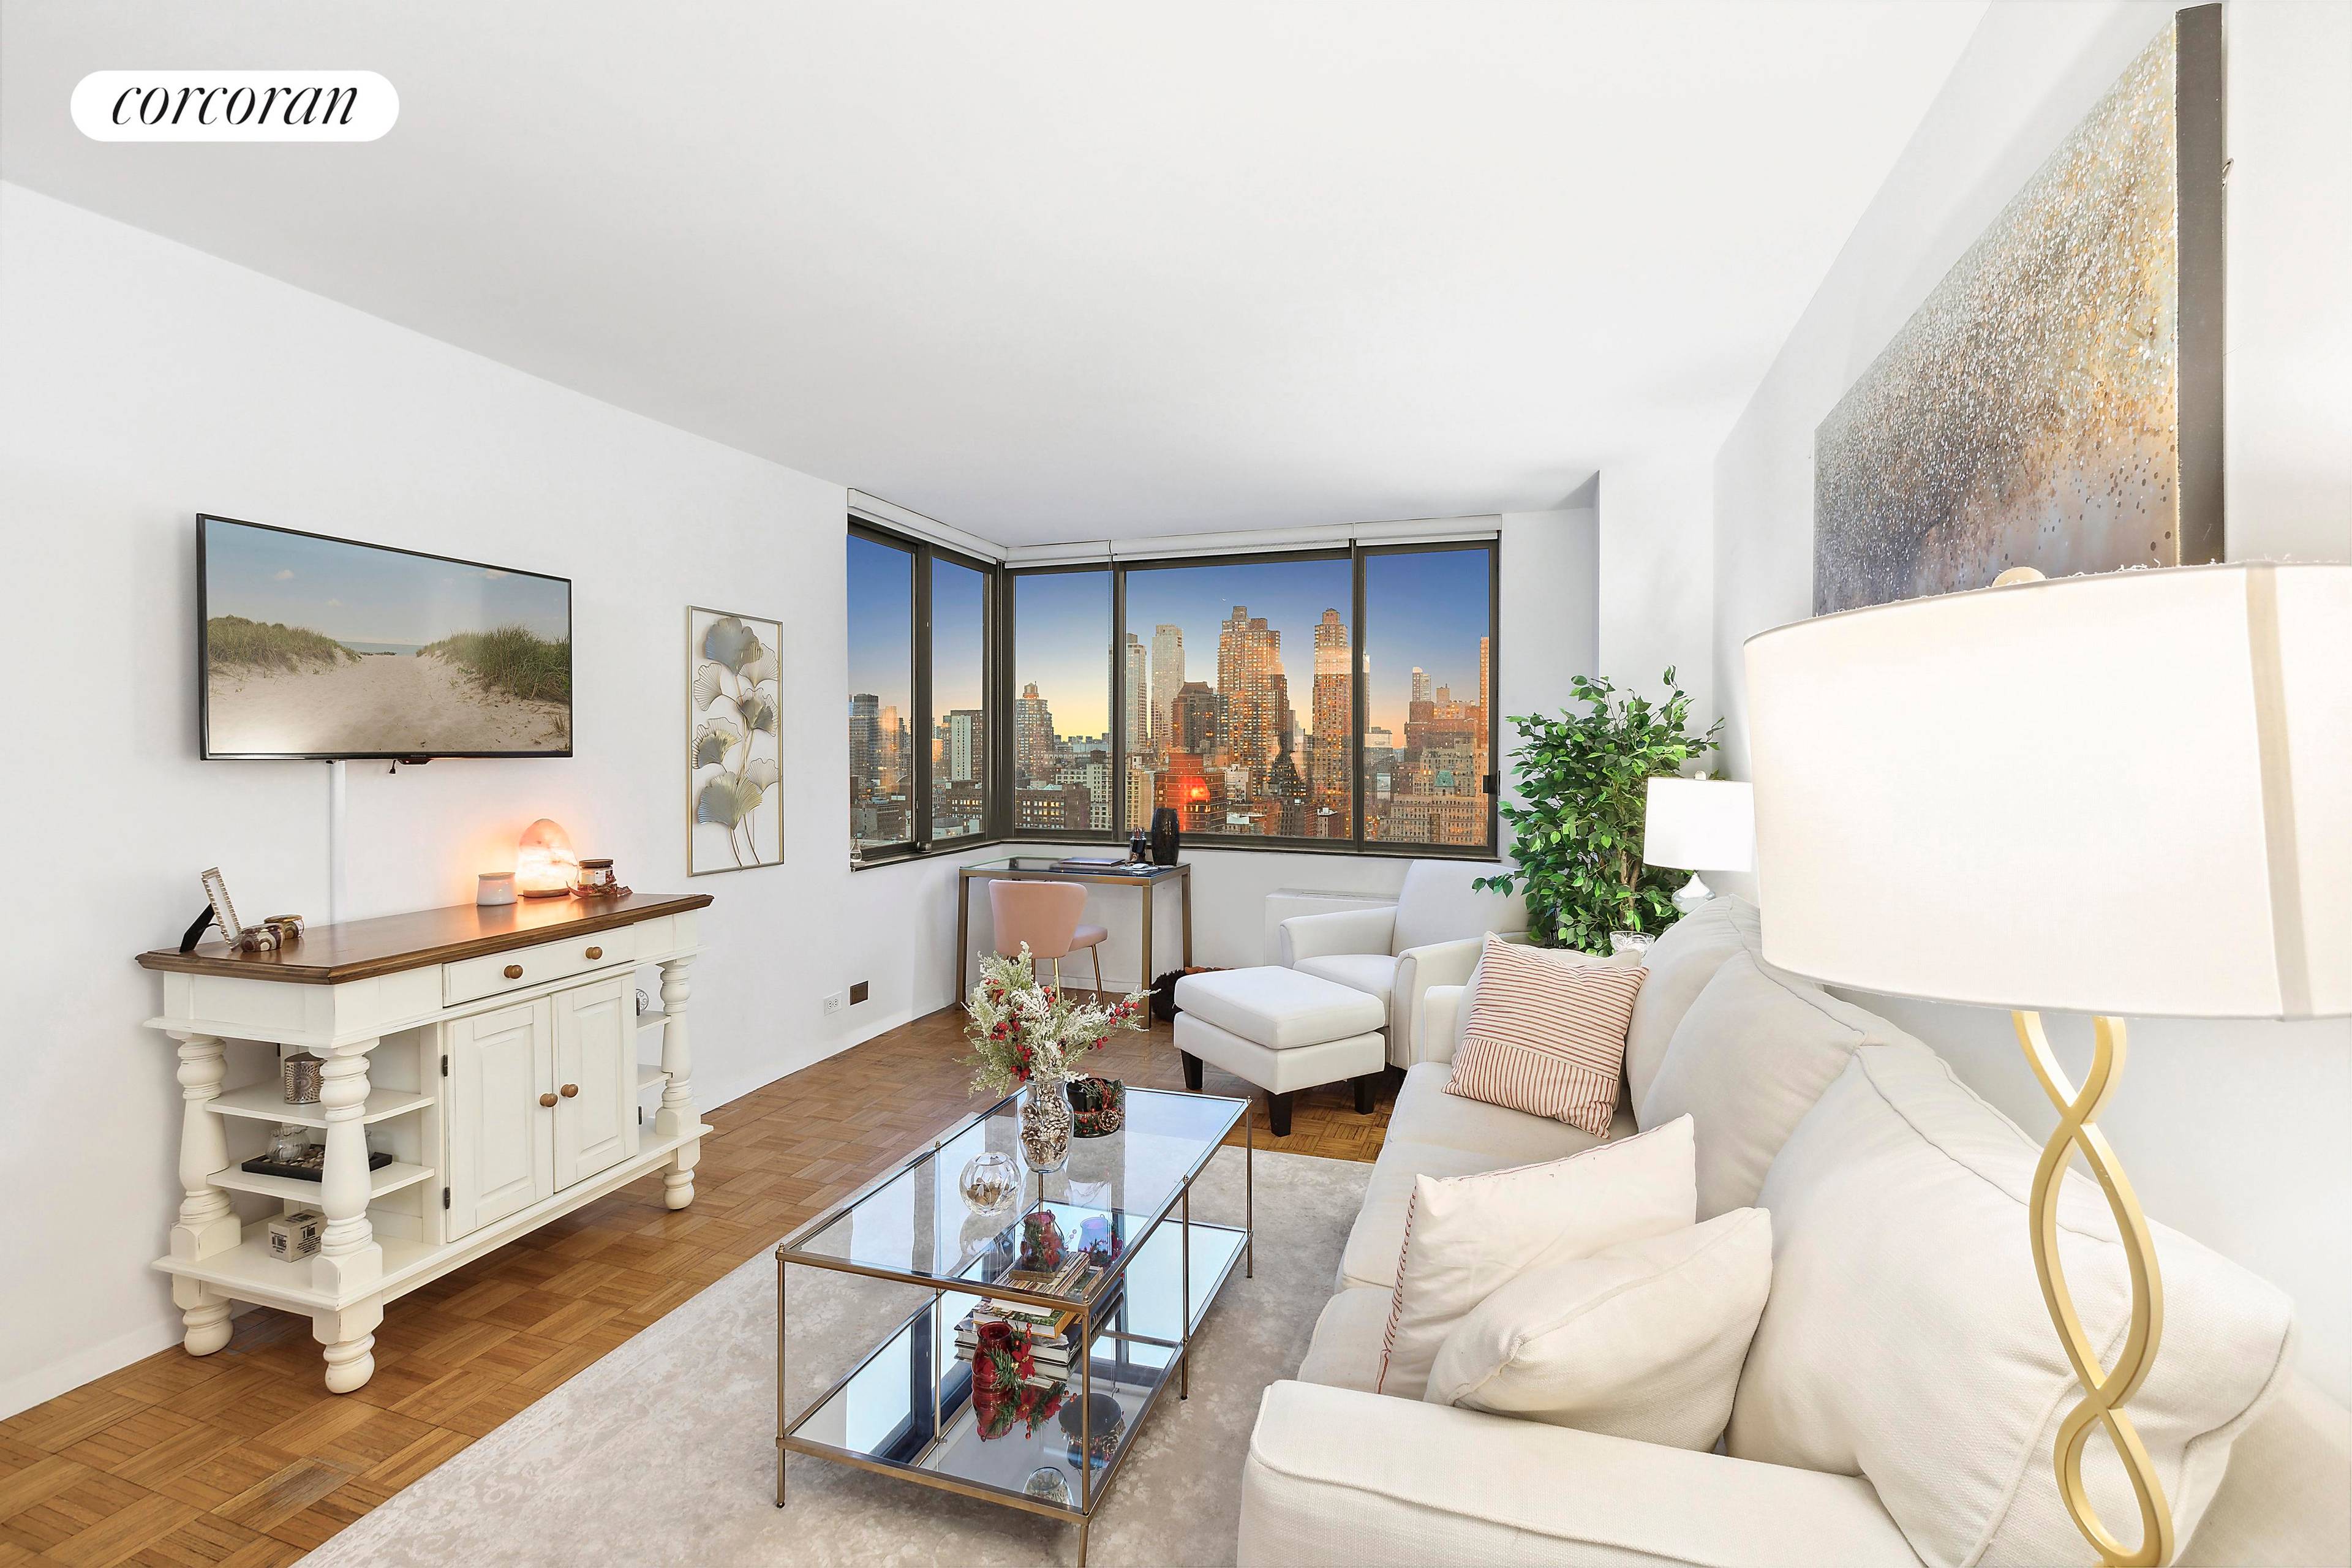 Residence 25G is a bright corner one bedroom condominium with great open city views to the Hudson River and the West and to the North.